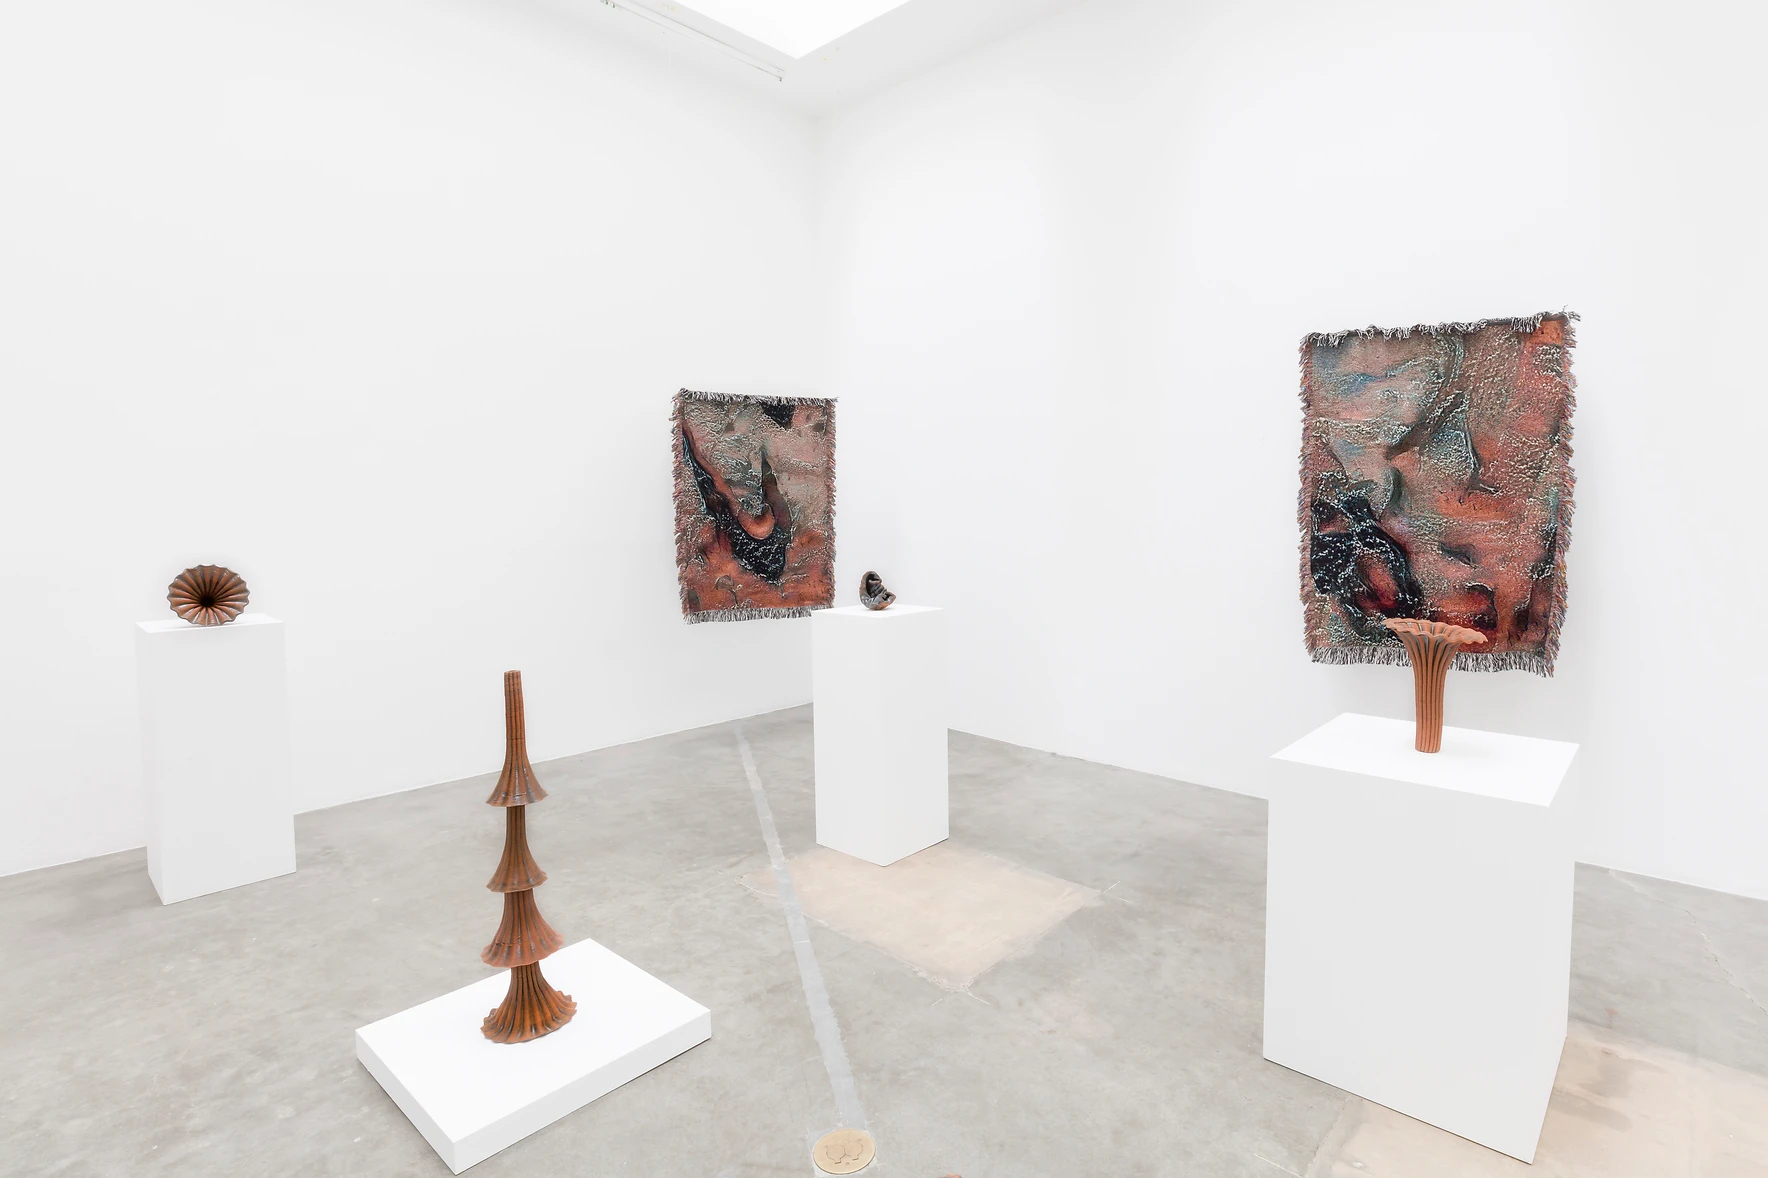 A gallery with white walls of ceramic sculptures and hanging textiles